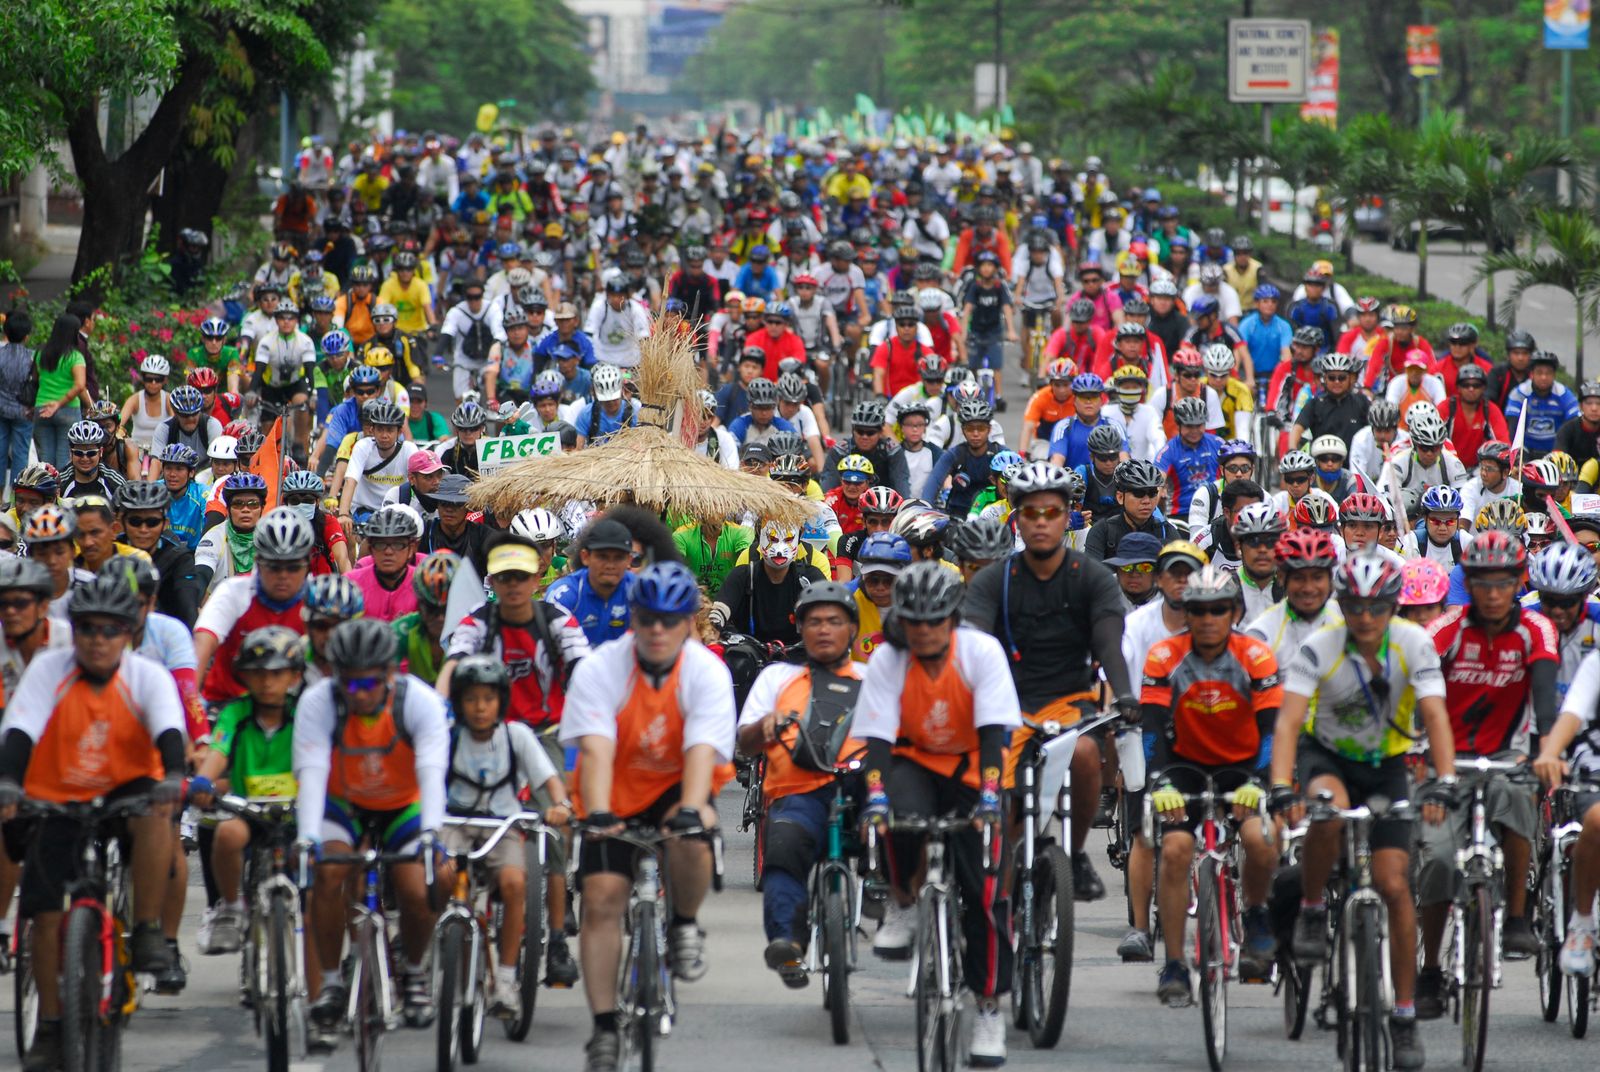 Thousands of bikers join the Annual Tour of the Fireflies around the streets of seven cities, in Manila on April 20, 2008 prior to Earth Day. The 50-kilometer bicycle ride promotes the use of bicycle as an alternative means of transportation that is cheap, efficient, environmentaly sensible and good for one's health. AFP PHOTO/LUIS LIWANAG (Photo by LUIS LIWANAG / AFP) - AFP